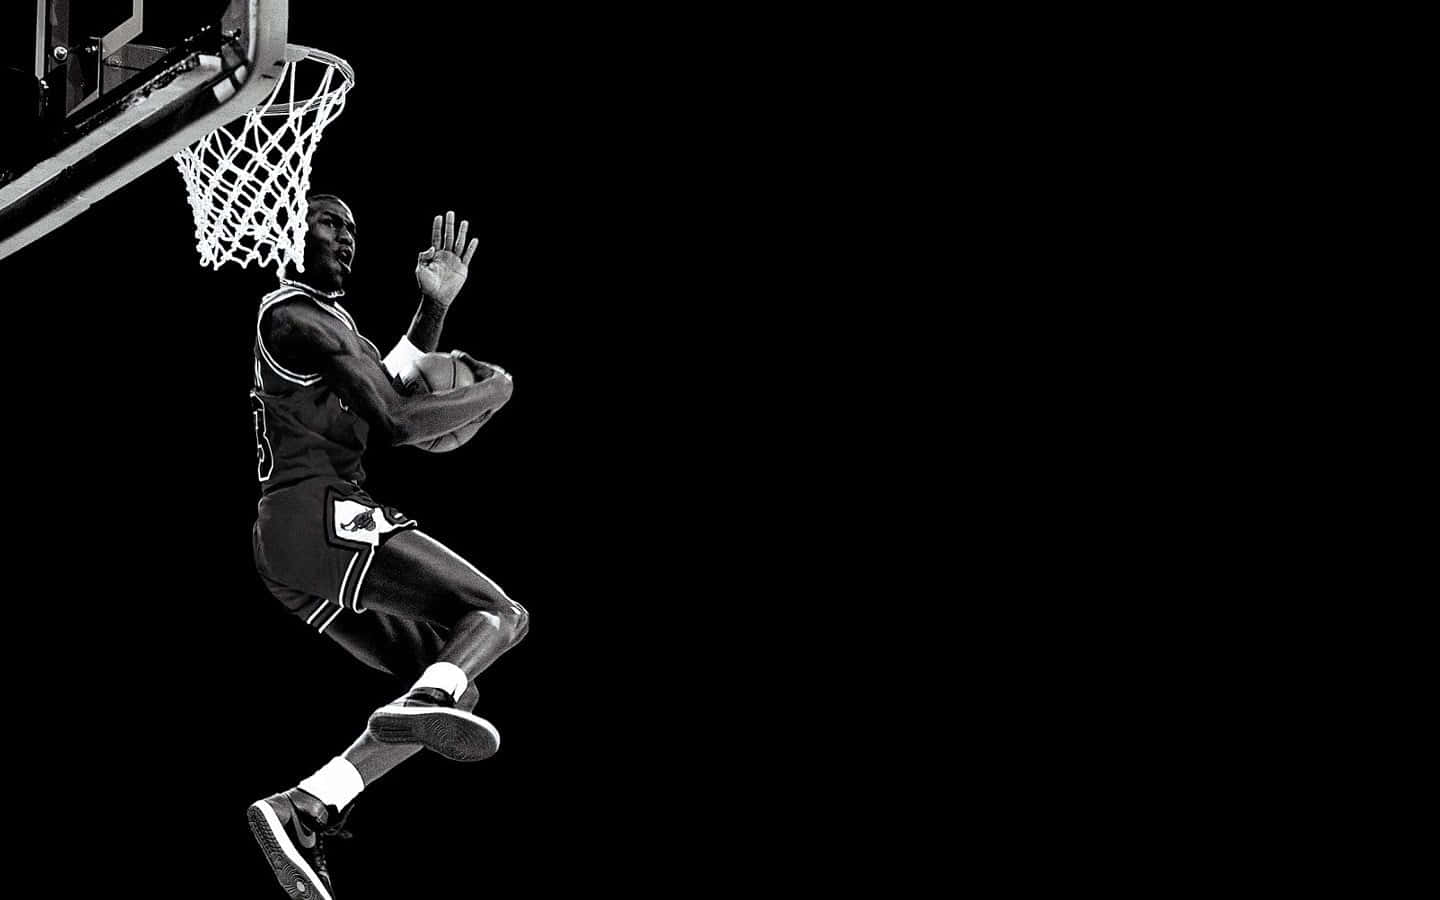 A Basketball Player Is Dunking The Ball In Black And White Wallpaper